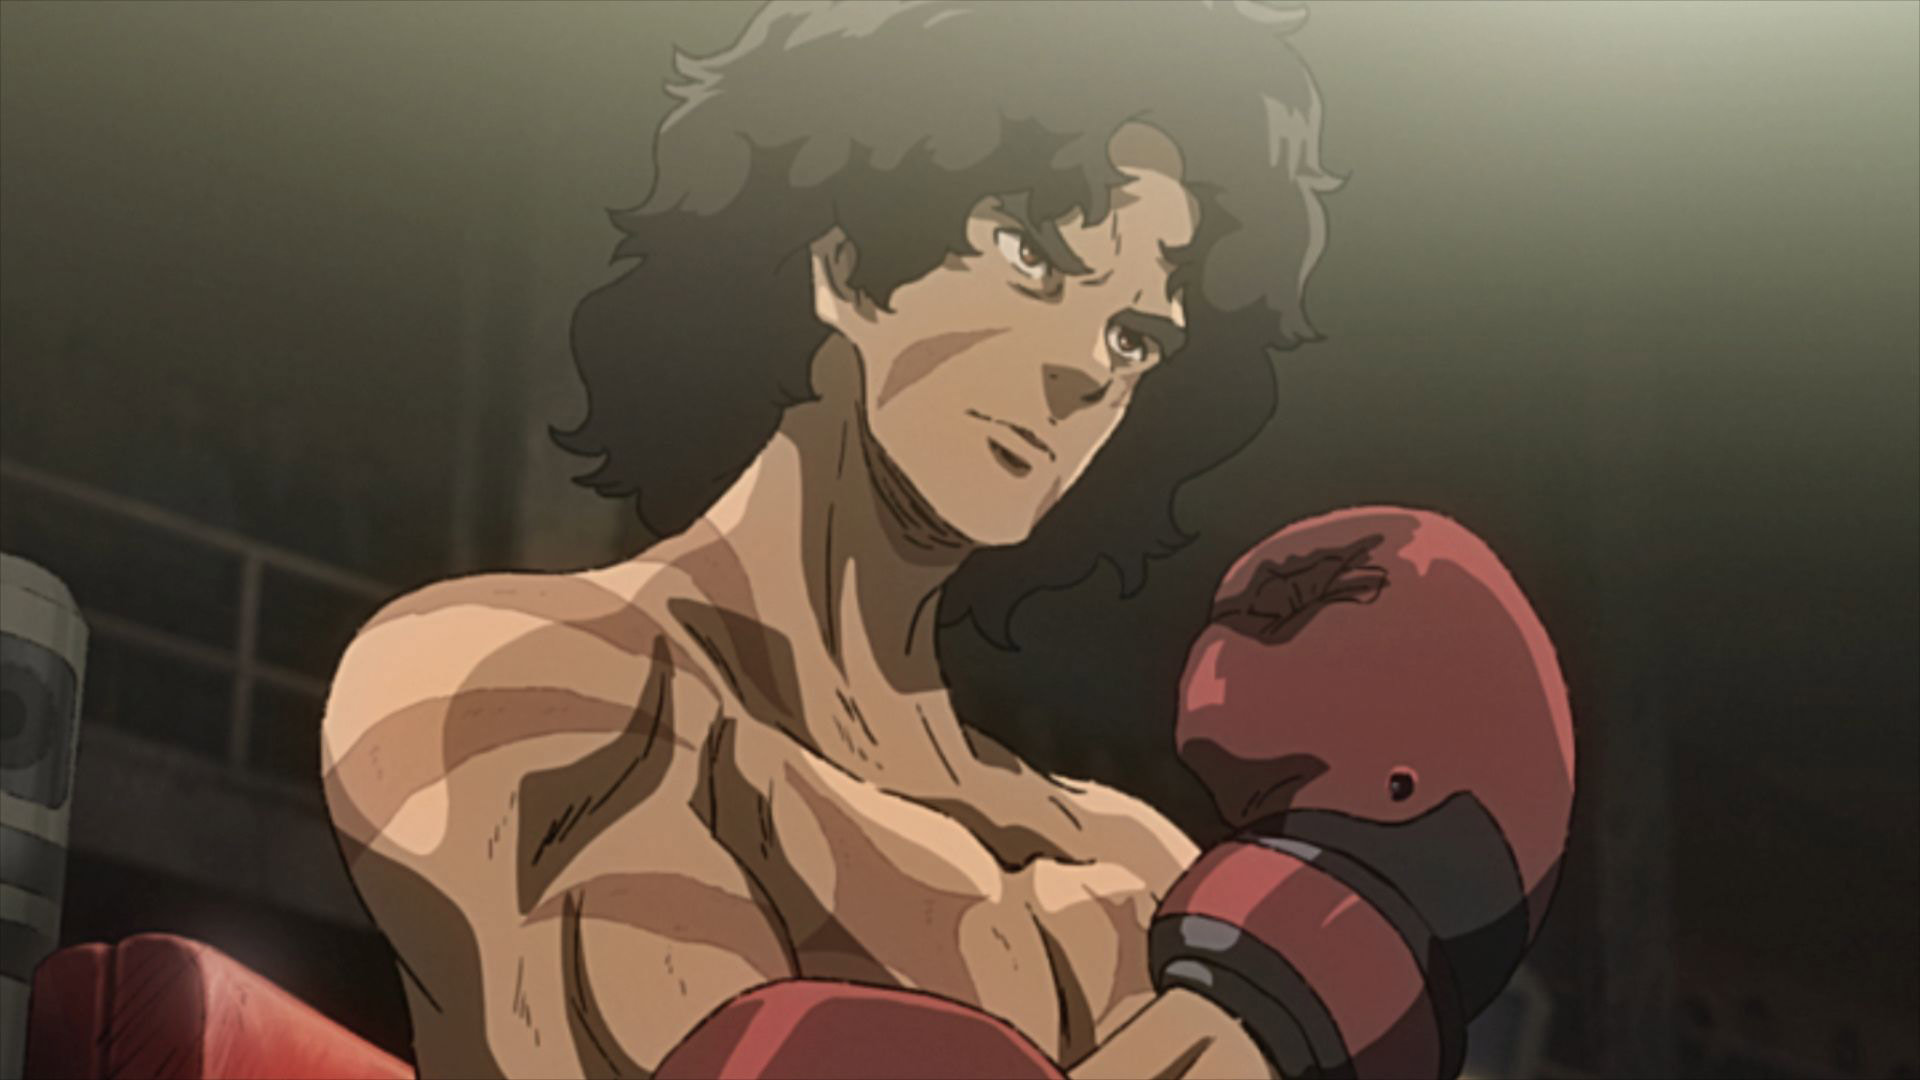 Gearless character Joe in the megalomaniac boxing anime